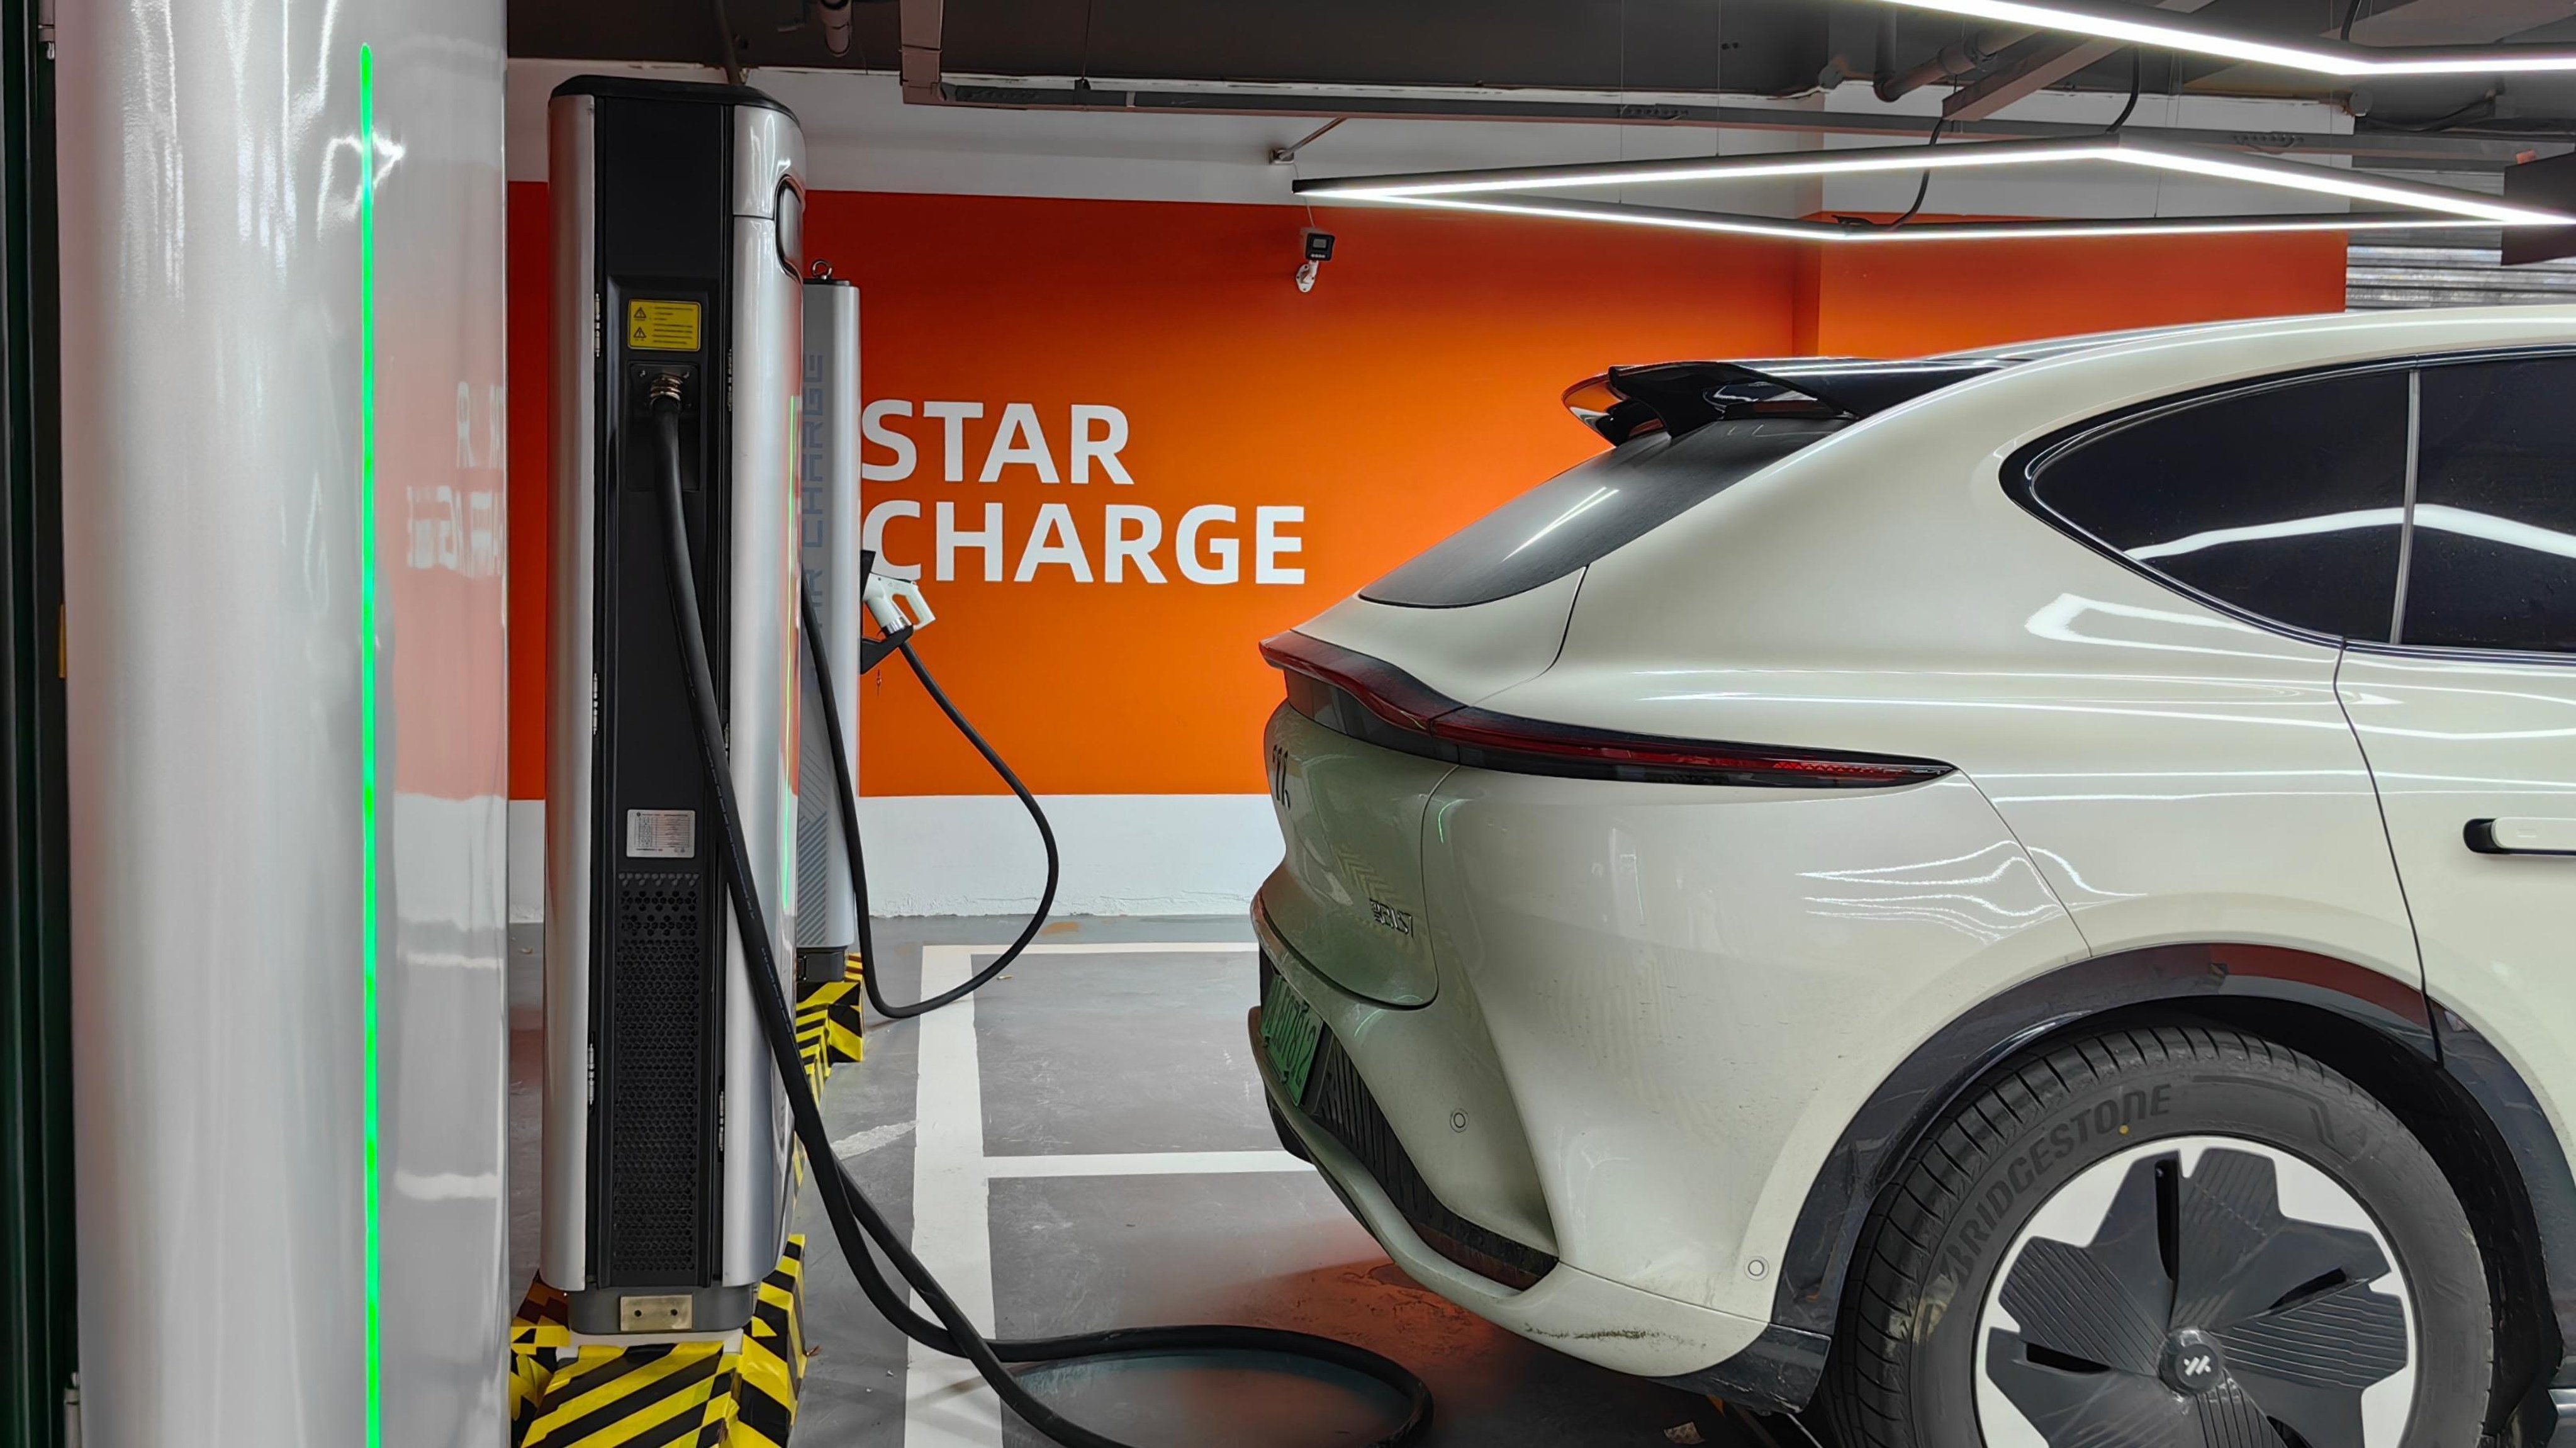 StarCharge charger in use. Photo: StarCharge